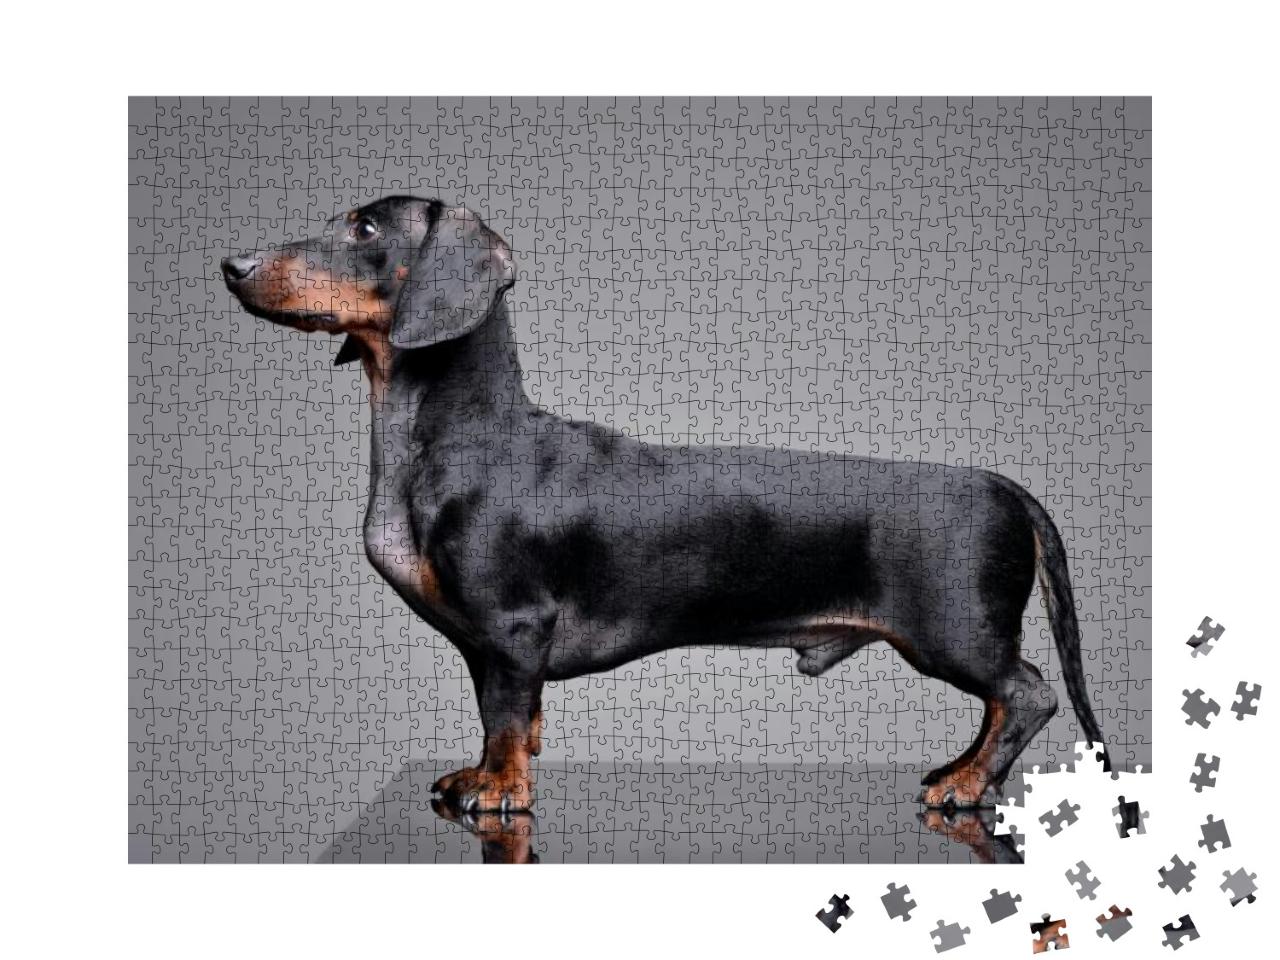 Studio Shot of an Adorable Dachshund Standing on Grey Bac... Jigsaw Puzzle with 1000 pieces